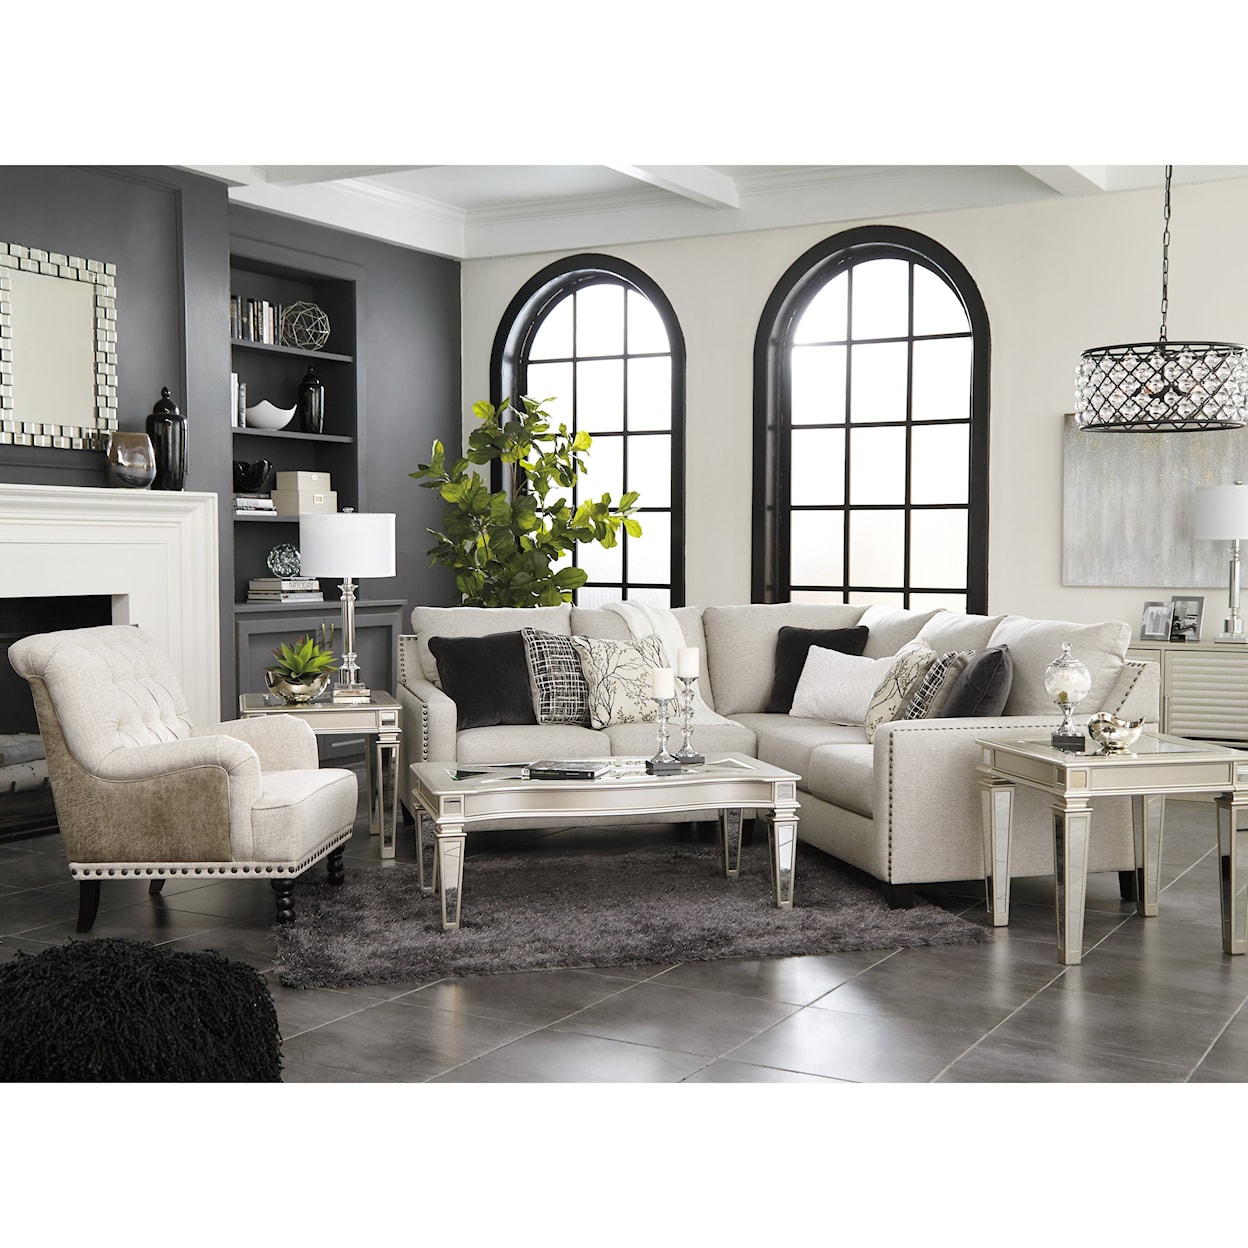 Signature Design by Ashley Hallenberg 2-Piece Sectional